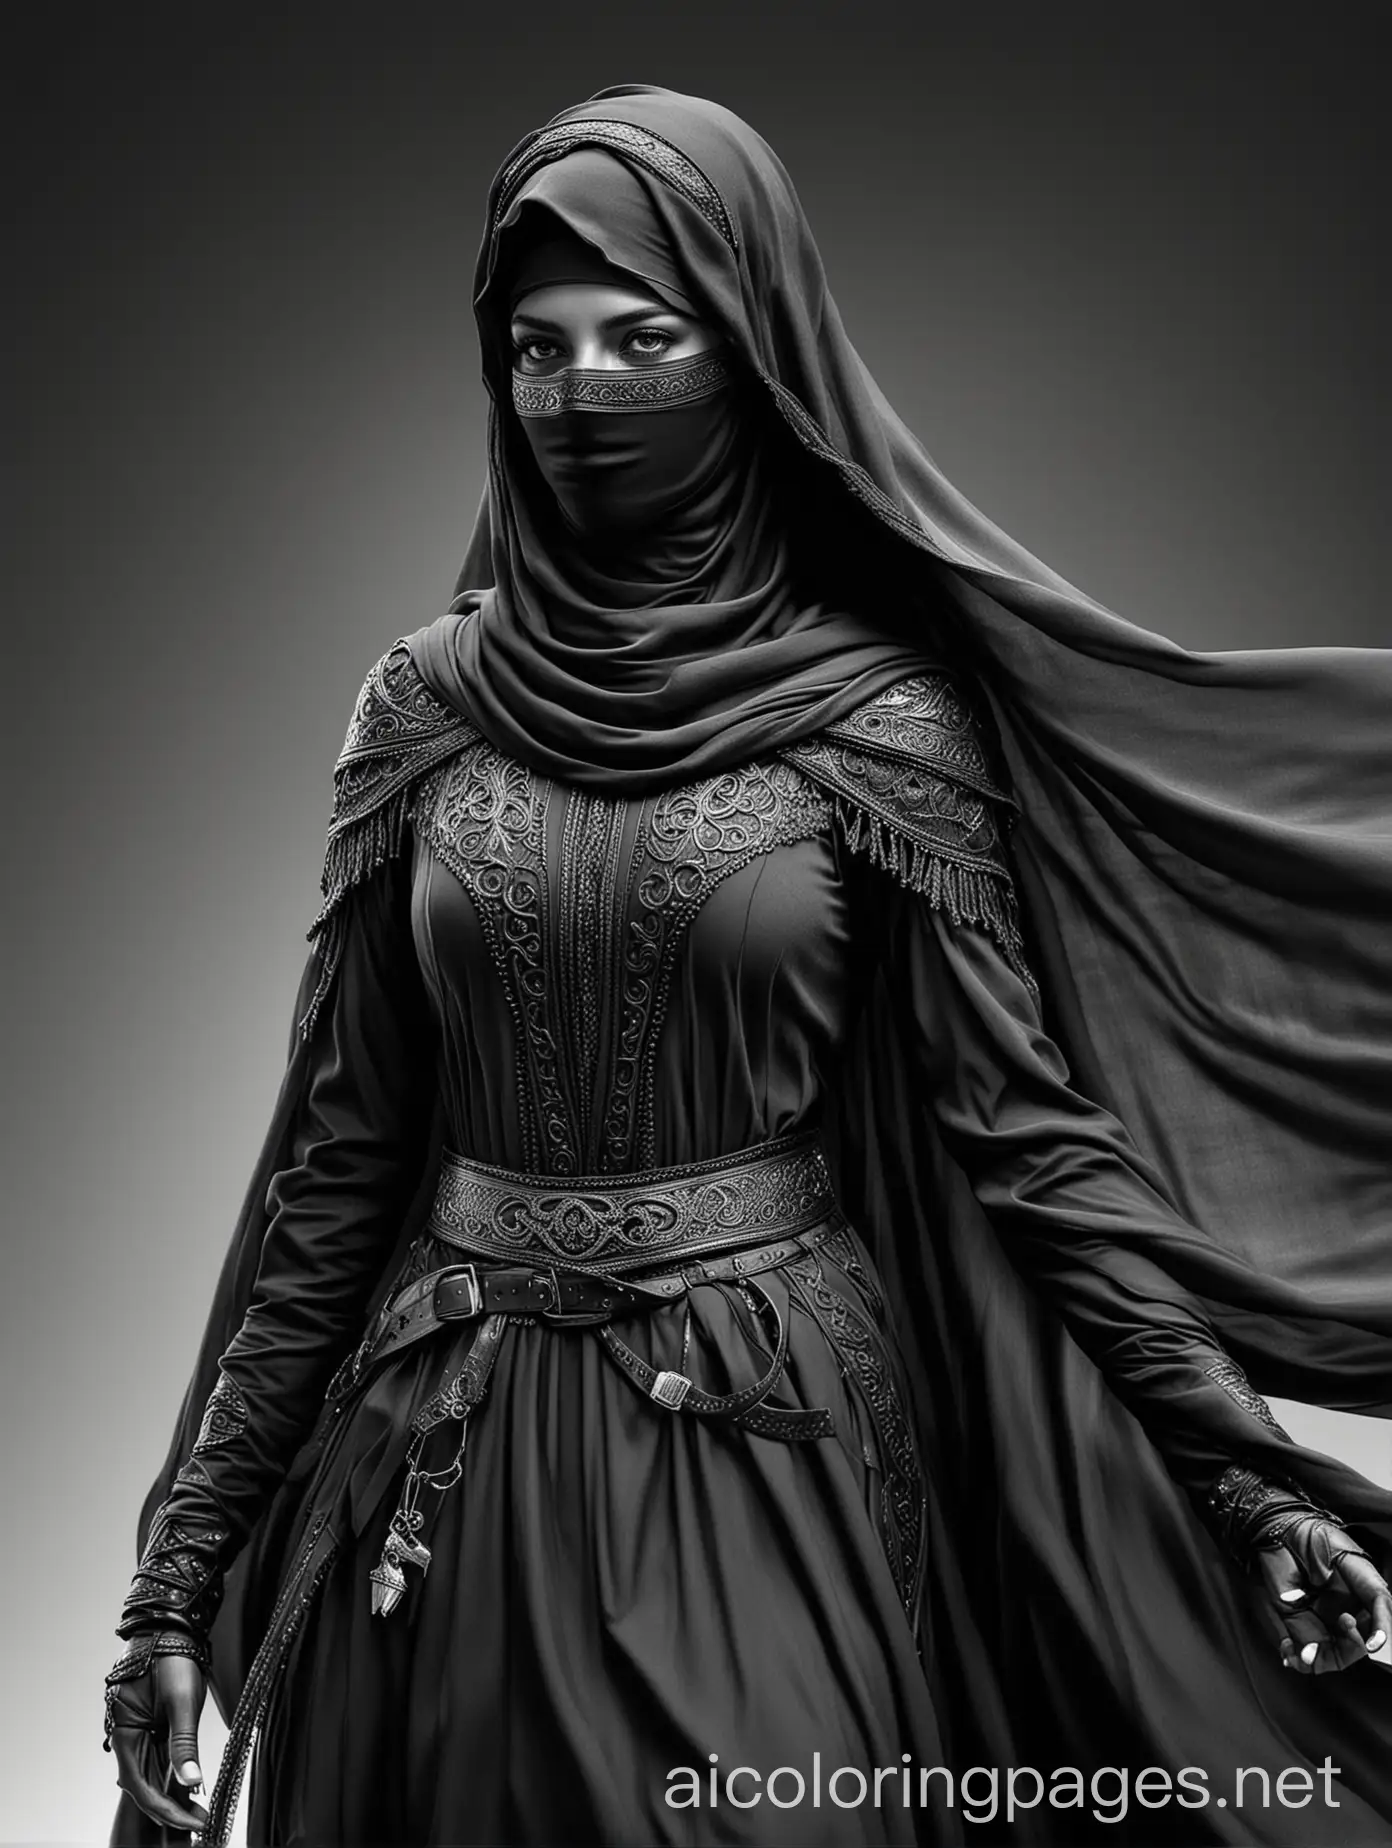 Veiled Arab horsewoman, graceful figure, wearing a burqa, shiny black horse, strong build, background that looks like a battlefield, front photo, realistic, without errors, high quality , Coloring Page, black and white, line art, white background, Simplicity, Ample White Space. The background of the coloring page is plain white to make it easy for young children to color within the lines. The outlines of all the subjects are easy to distinguish, making it simple for kids to color without too much difficulty